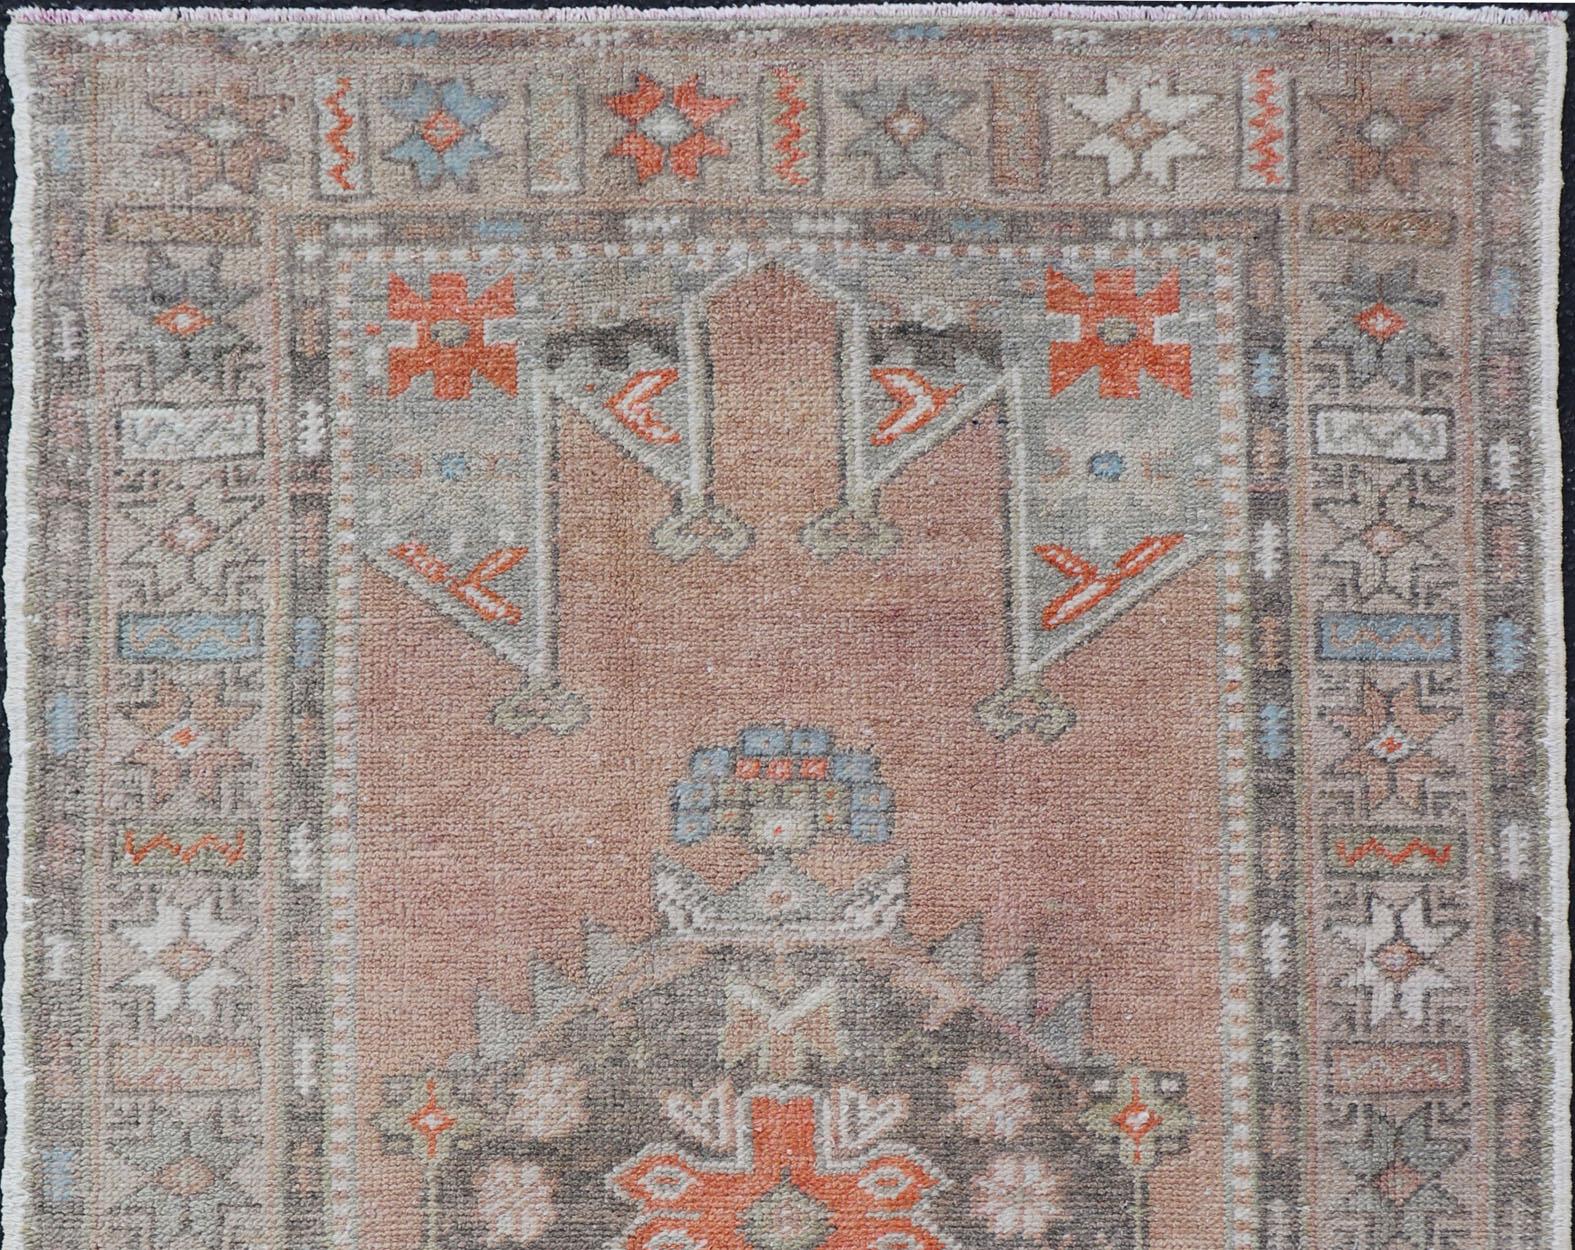 Beautiful Turkish rug with cheerful design, Keivan Woven Arts / rug EN-2338, country of origin / type: Turkey / Oushak, circa 1940

This vintage Turkish Oushak rug features a central medallion design flanked by various tribal and geometric motifs.